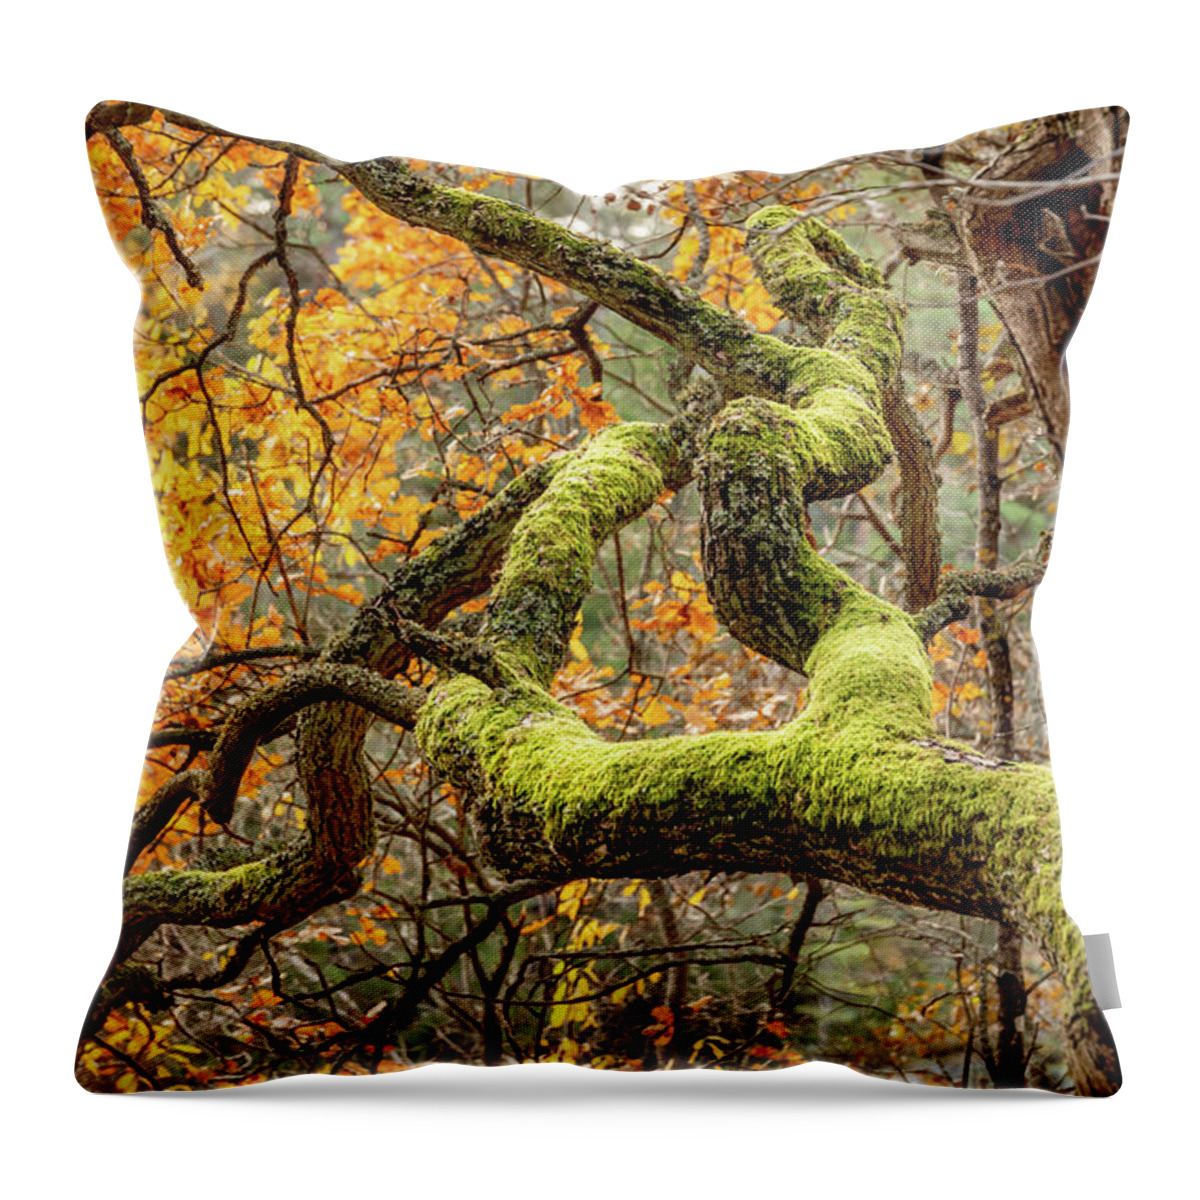 Forest Throw Pillow featuring the photograph Reaching Autumn Branch by Nicklas Gustafsson